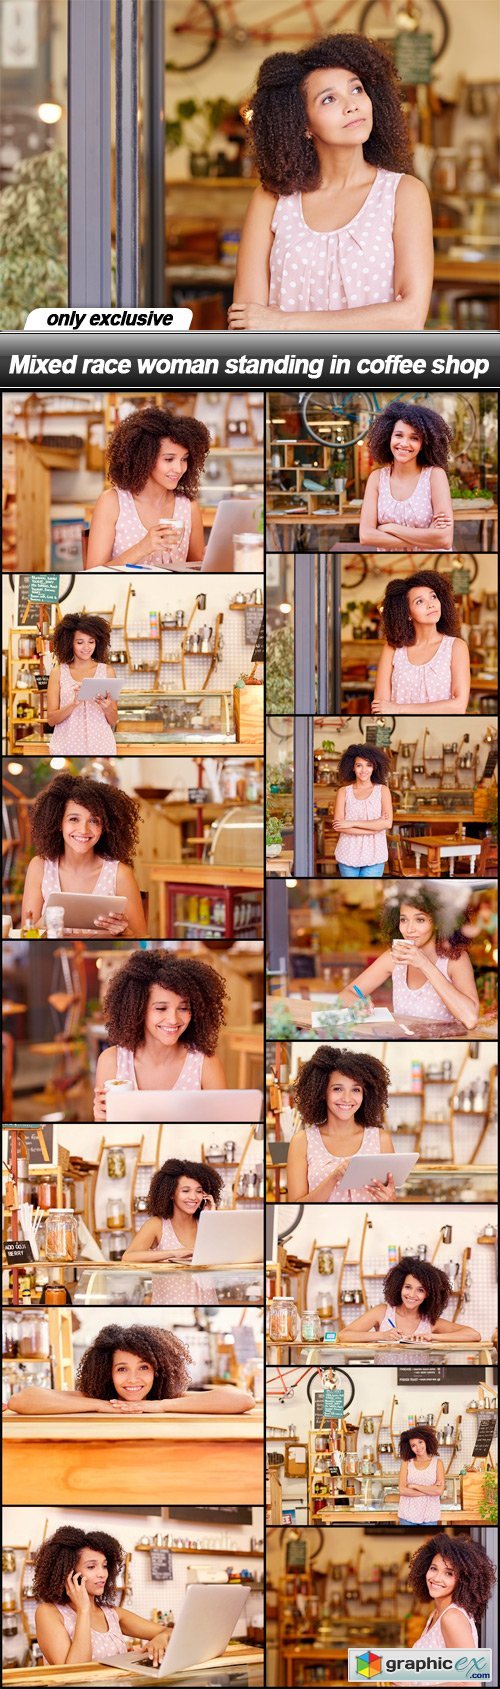 Mixed race woman standing in coffee shop - 15 UHQ JPEG